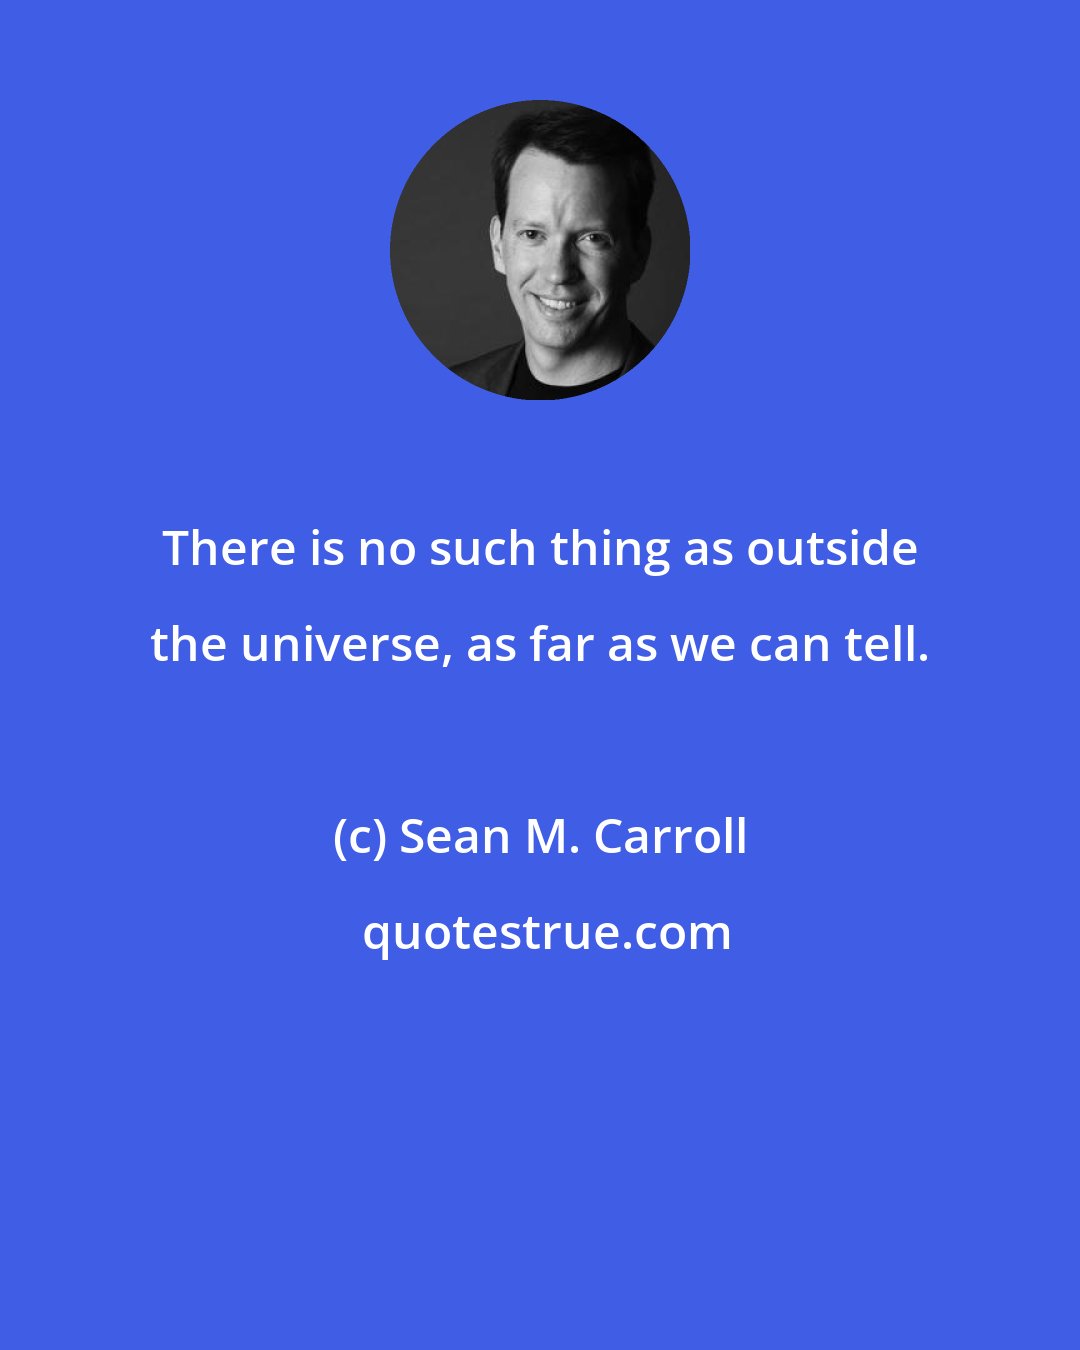 Sean M. Carroll: There is no such thing as outside the universe, as far as we can tell.